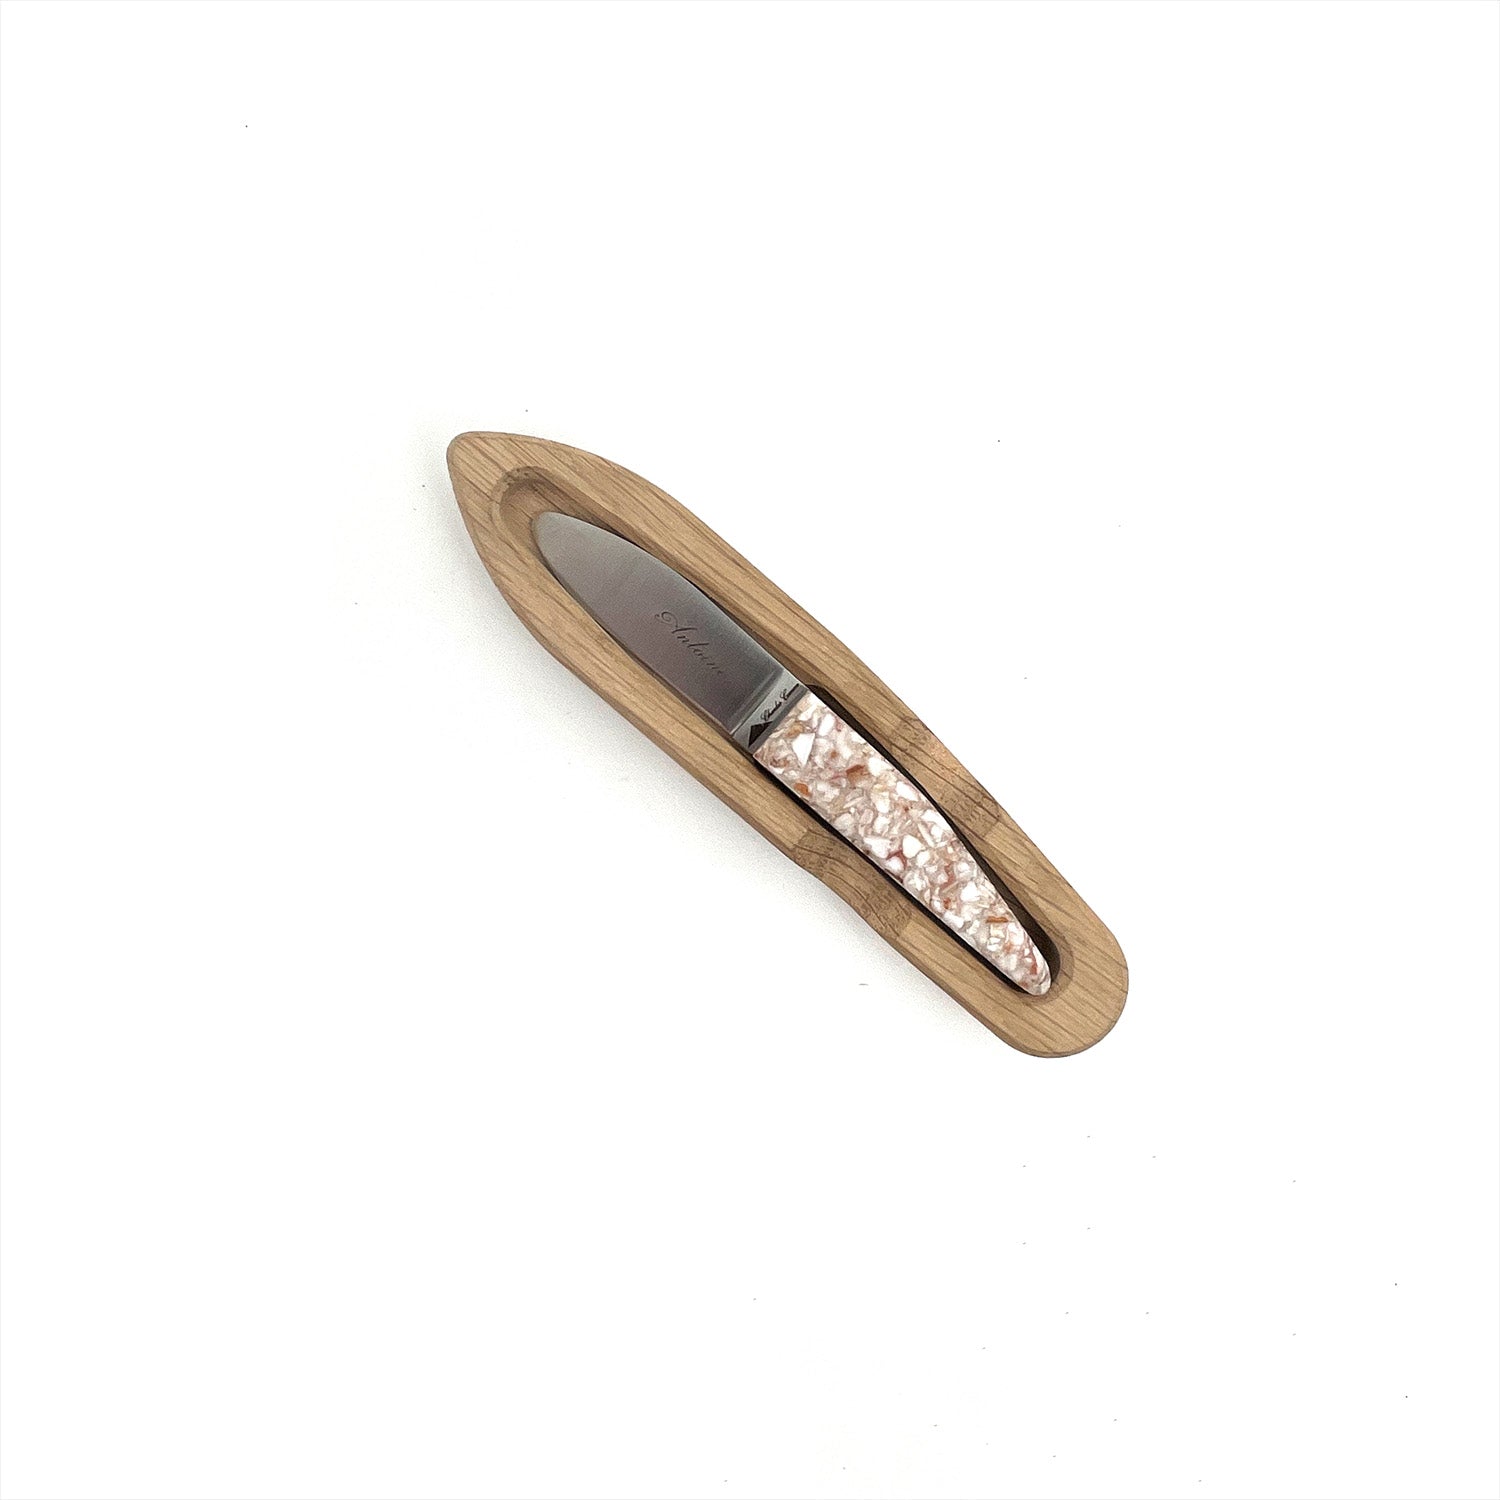 Children's knife with a handle made from recycled scallop shells